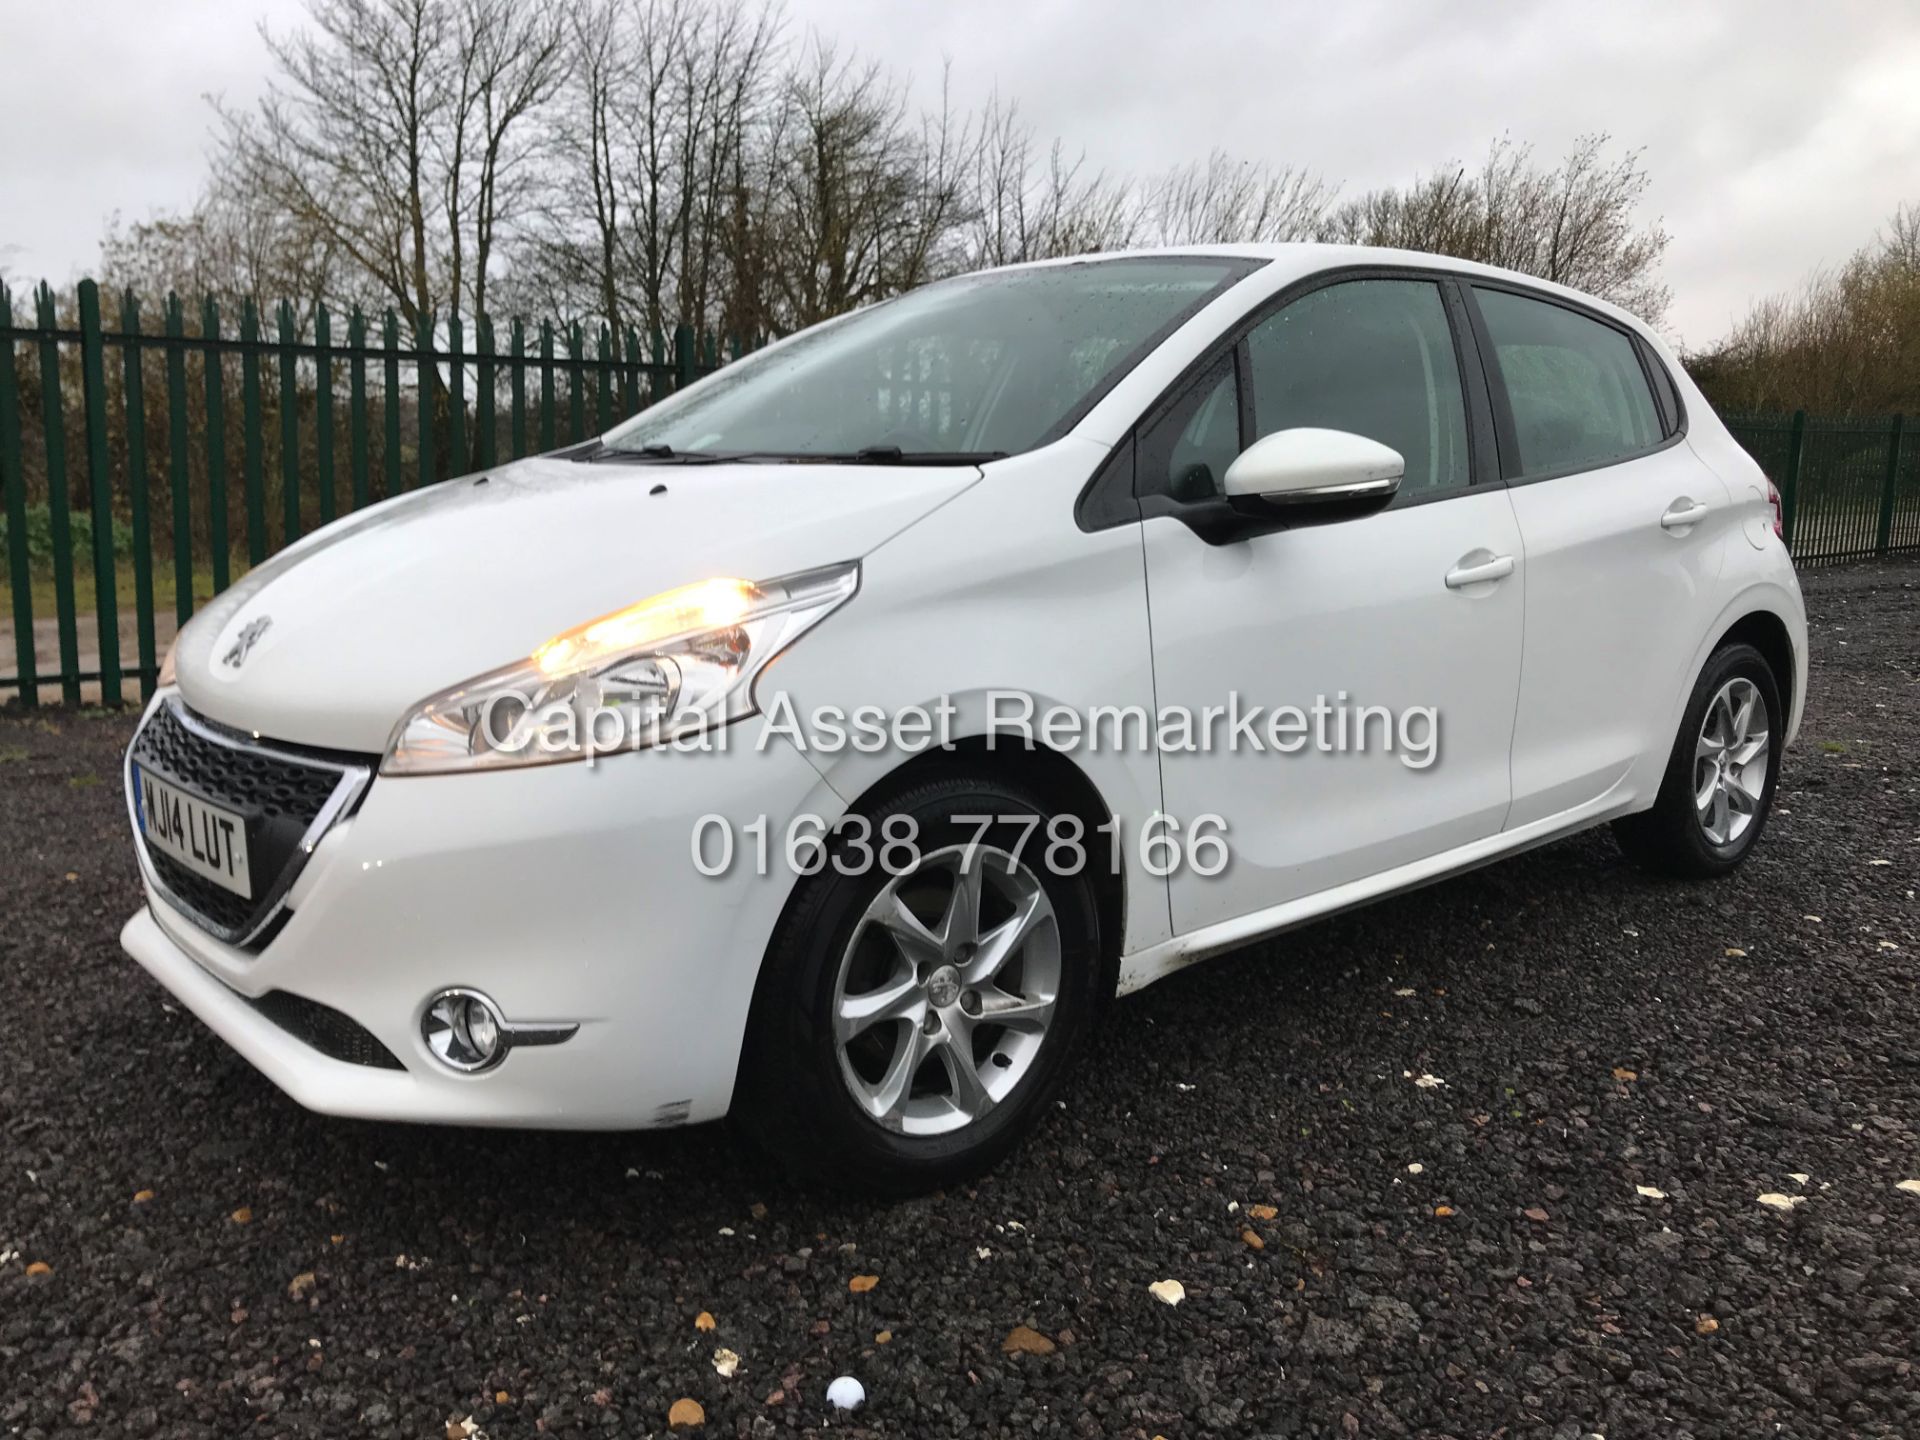 (ON SALE) PEUGEOT 208 1.4HDI "ACTIVE" 1 PREVIOUS KEEPER FSH (14 REG) RECENT SERVICE-AIR CON *NO VAT* - Image 4 of 23